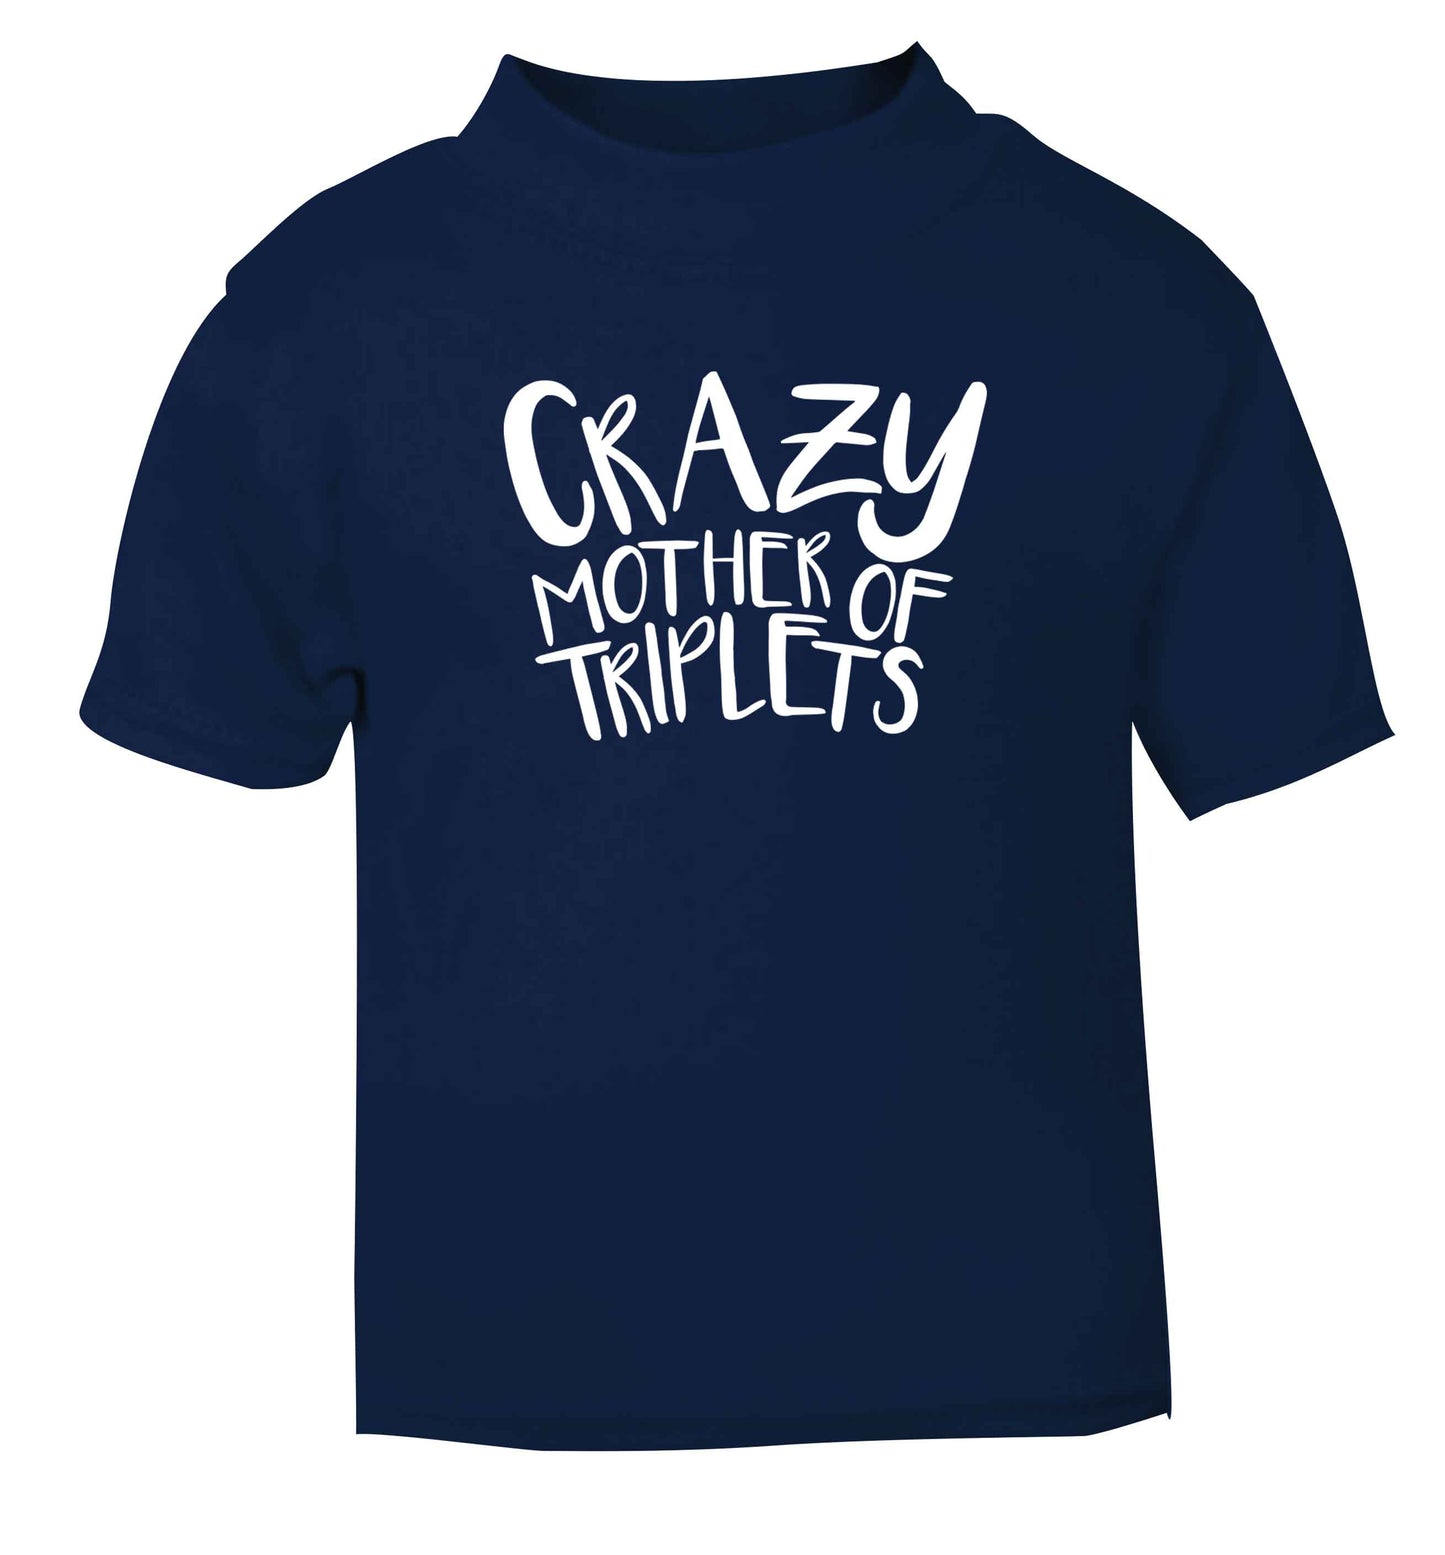 Crazy mother of triplets navy baby toddler Tshirt 2 Years